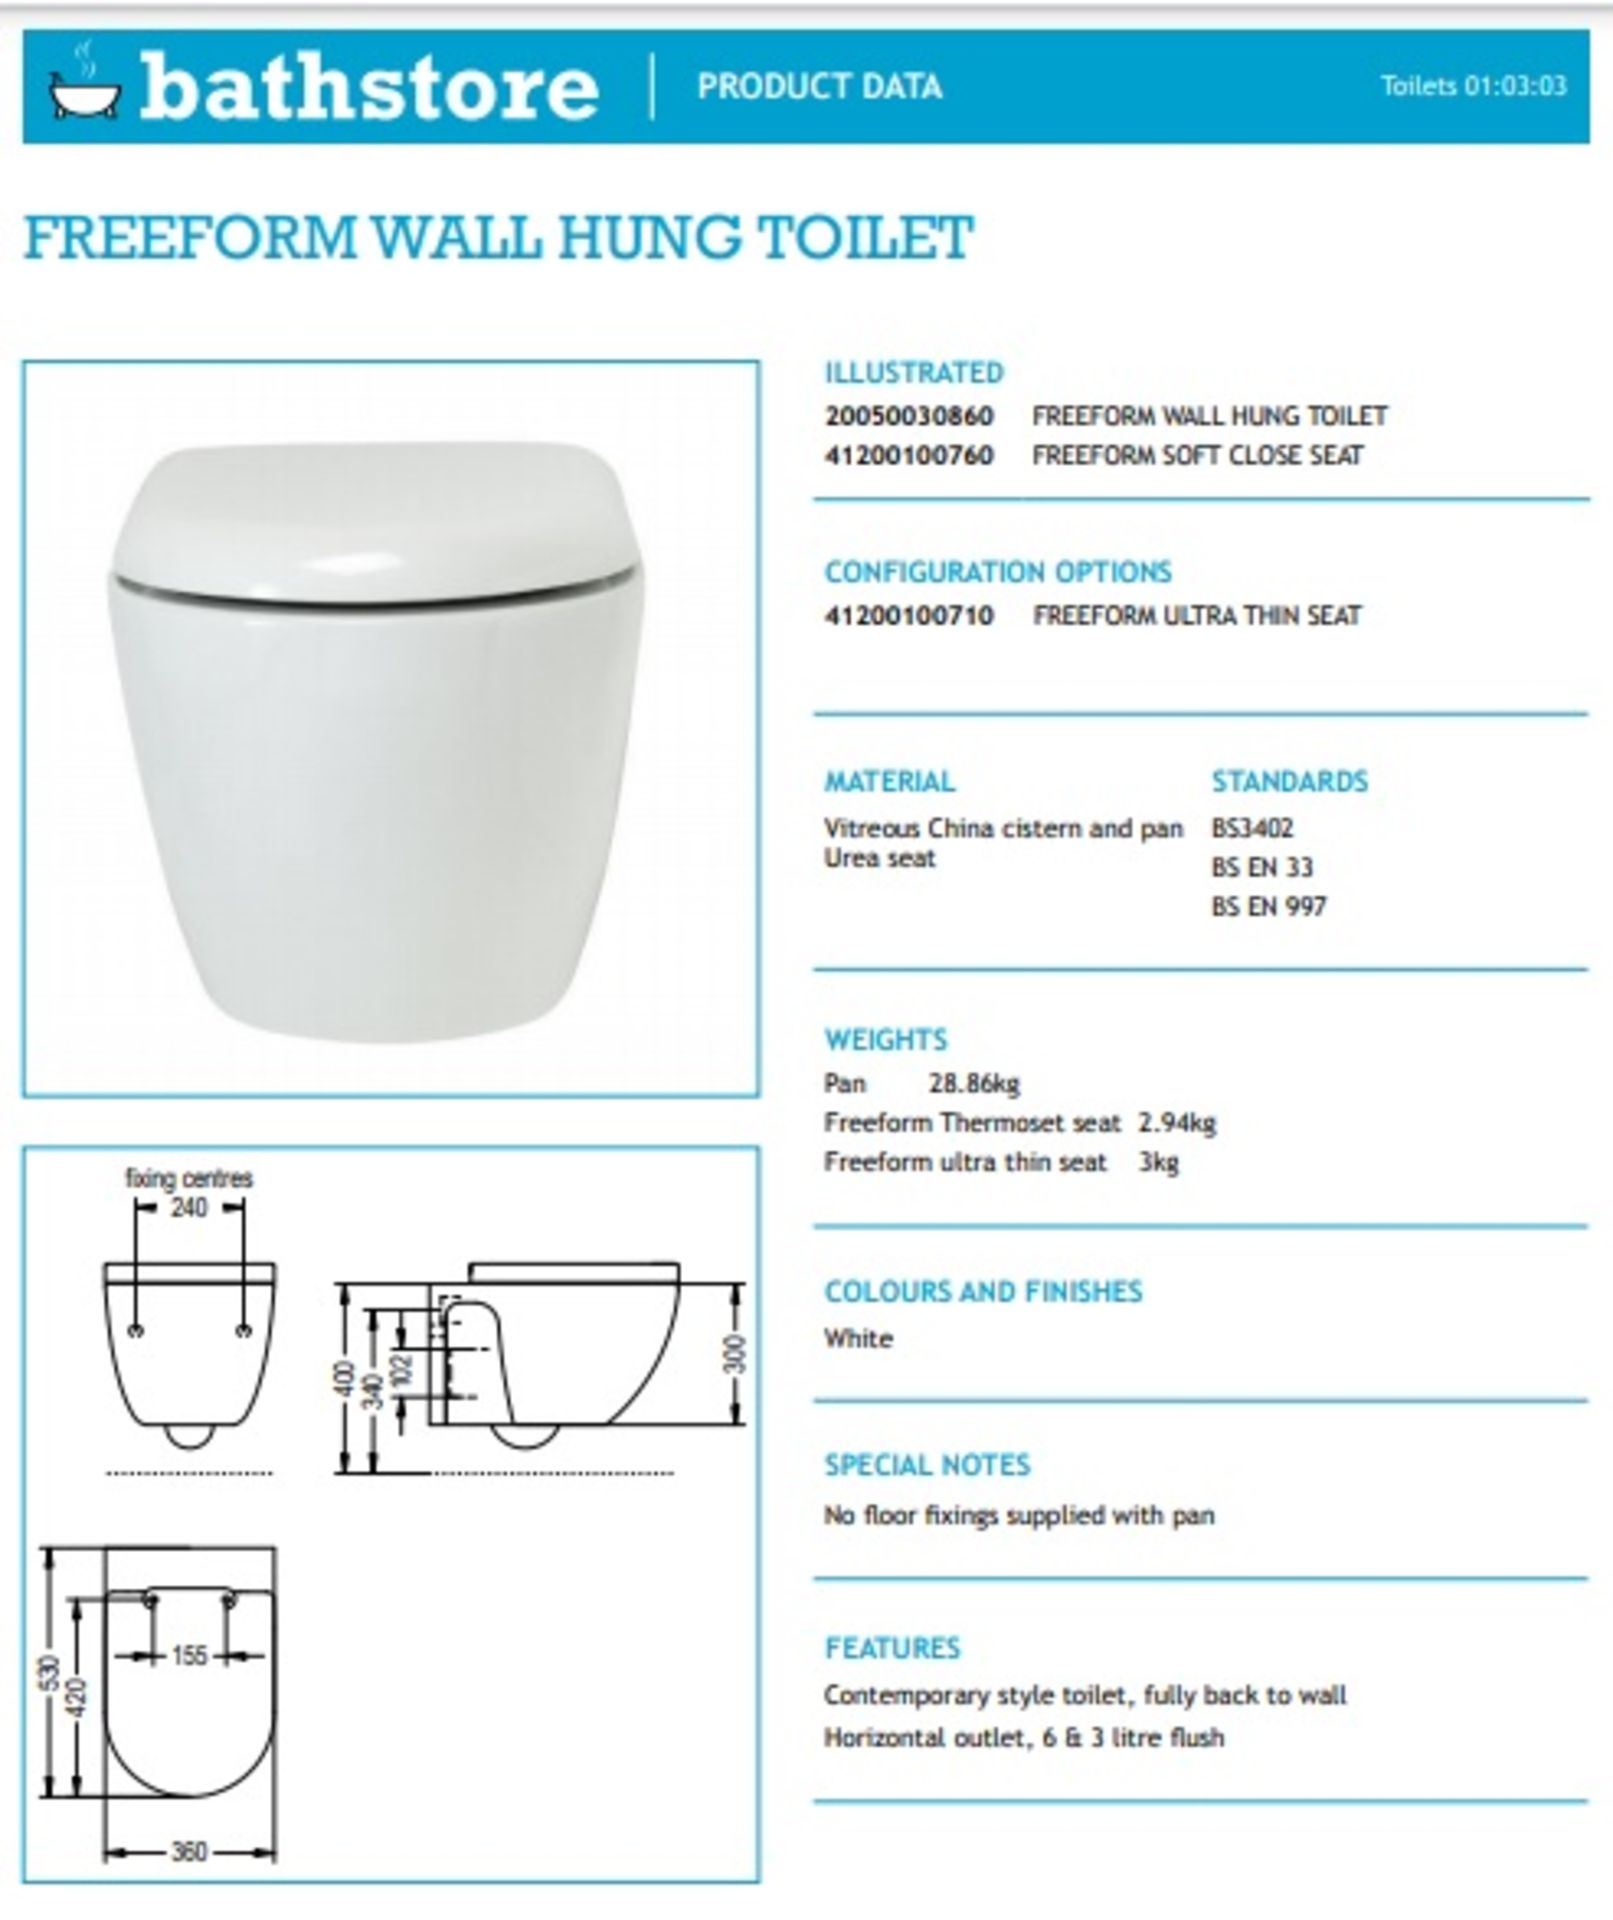 BS110 - 10 x Freeform Wall Hung Toilet Pans RRP £2500 - Image 2 of 2